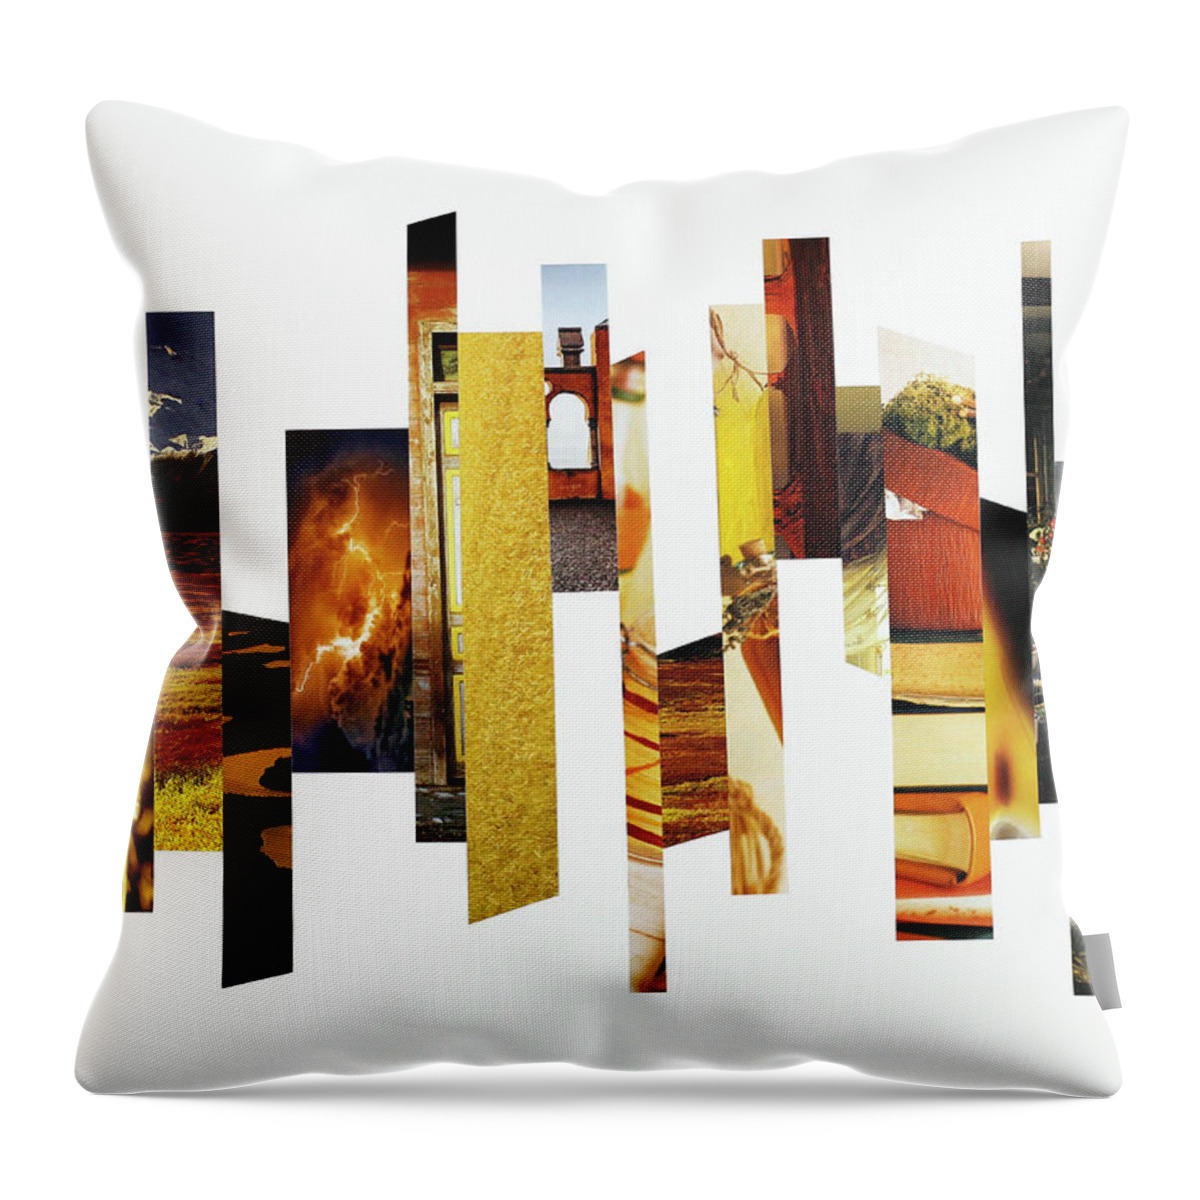 Collage Throw Pillow featuring the photograph Crosscut#130 by Robert Glover